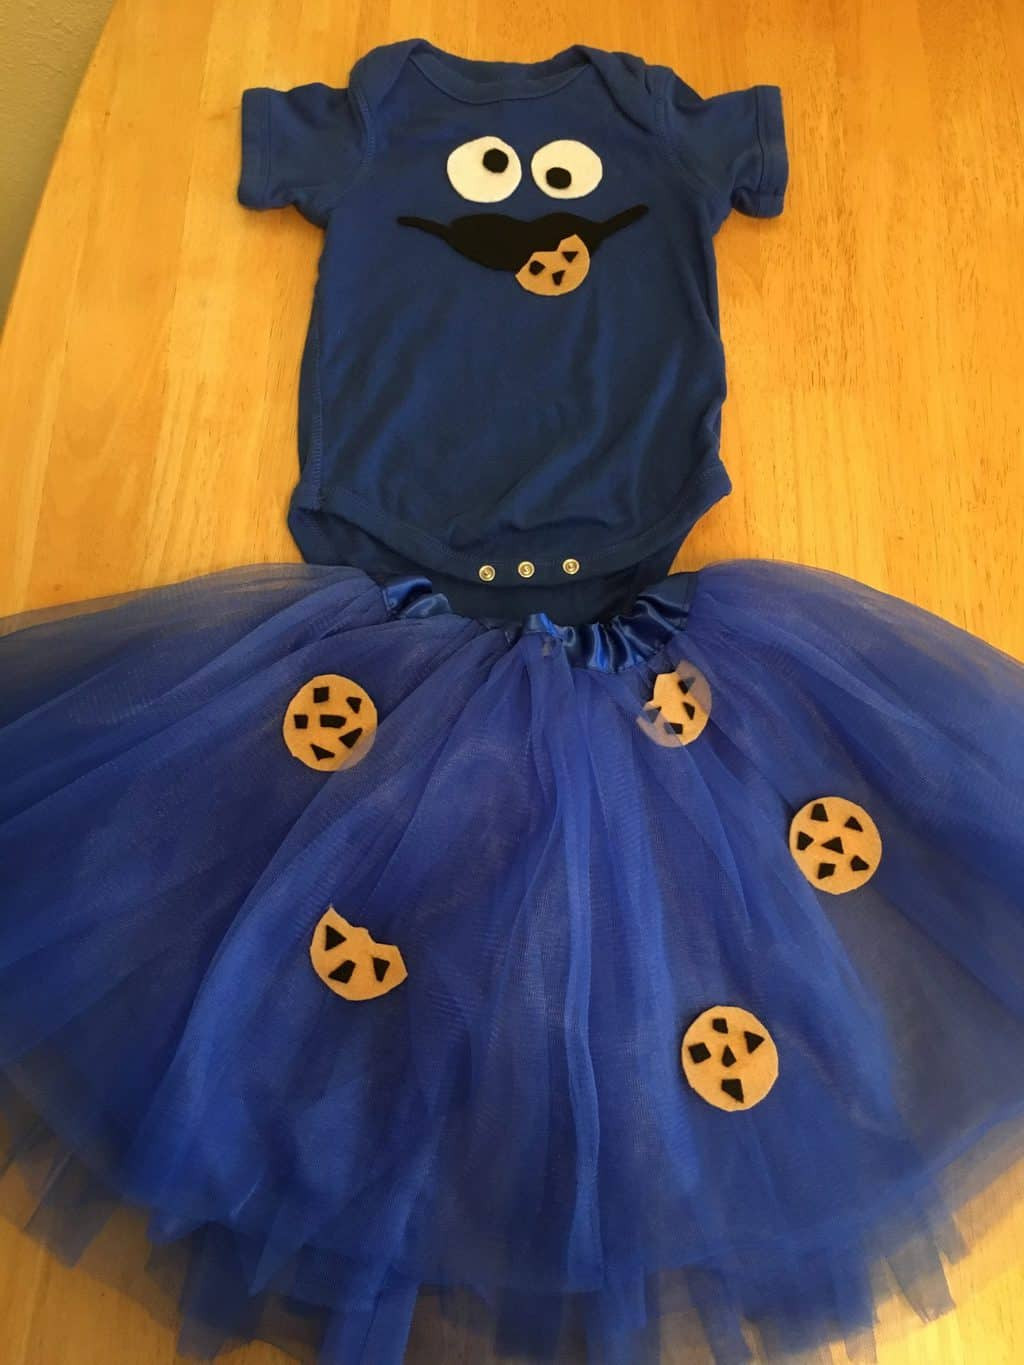 Cookie Monster Costume DIY
 DIY Cookie Monster costume for kids Diary of a So Cal mama